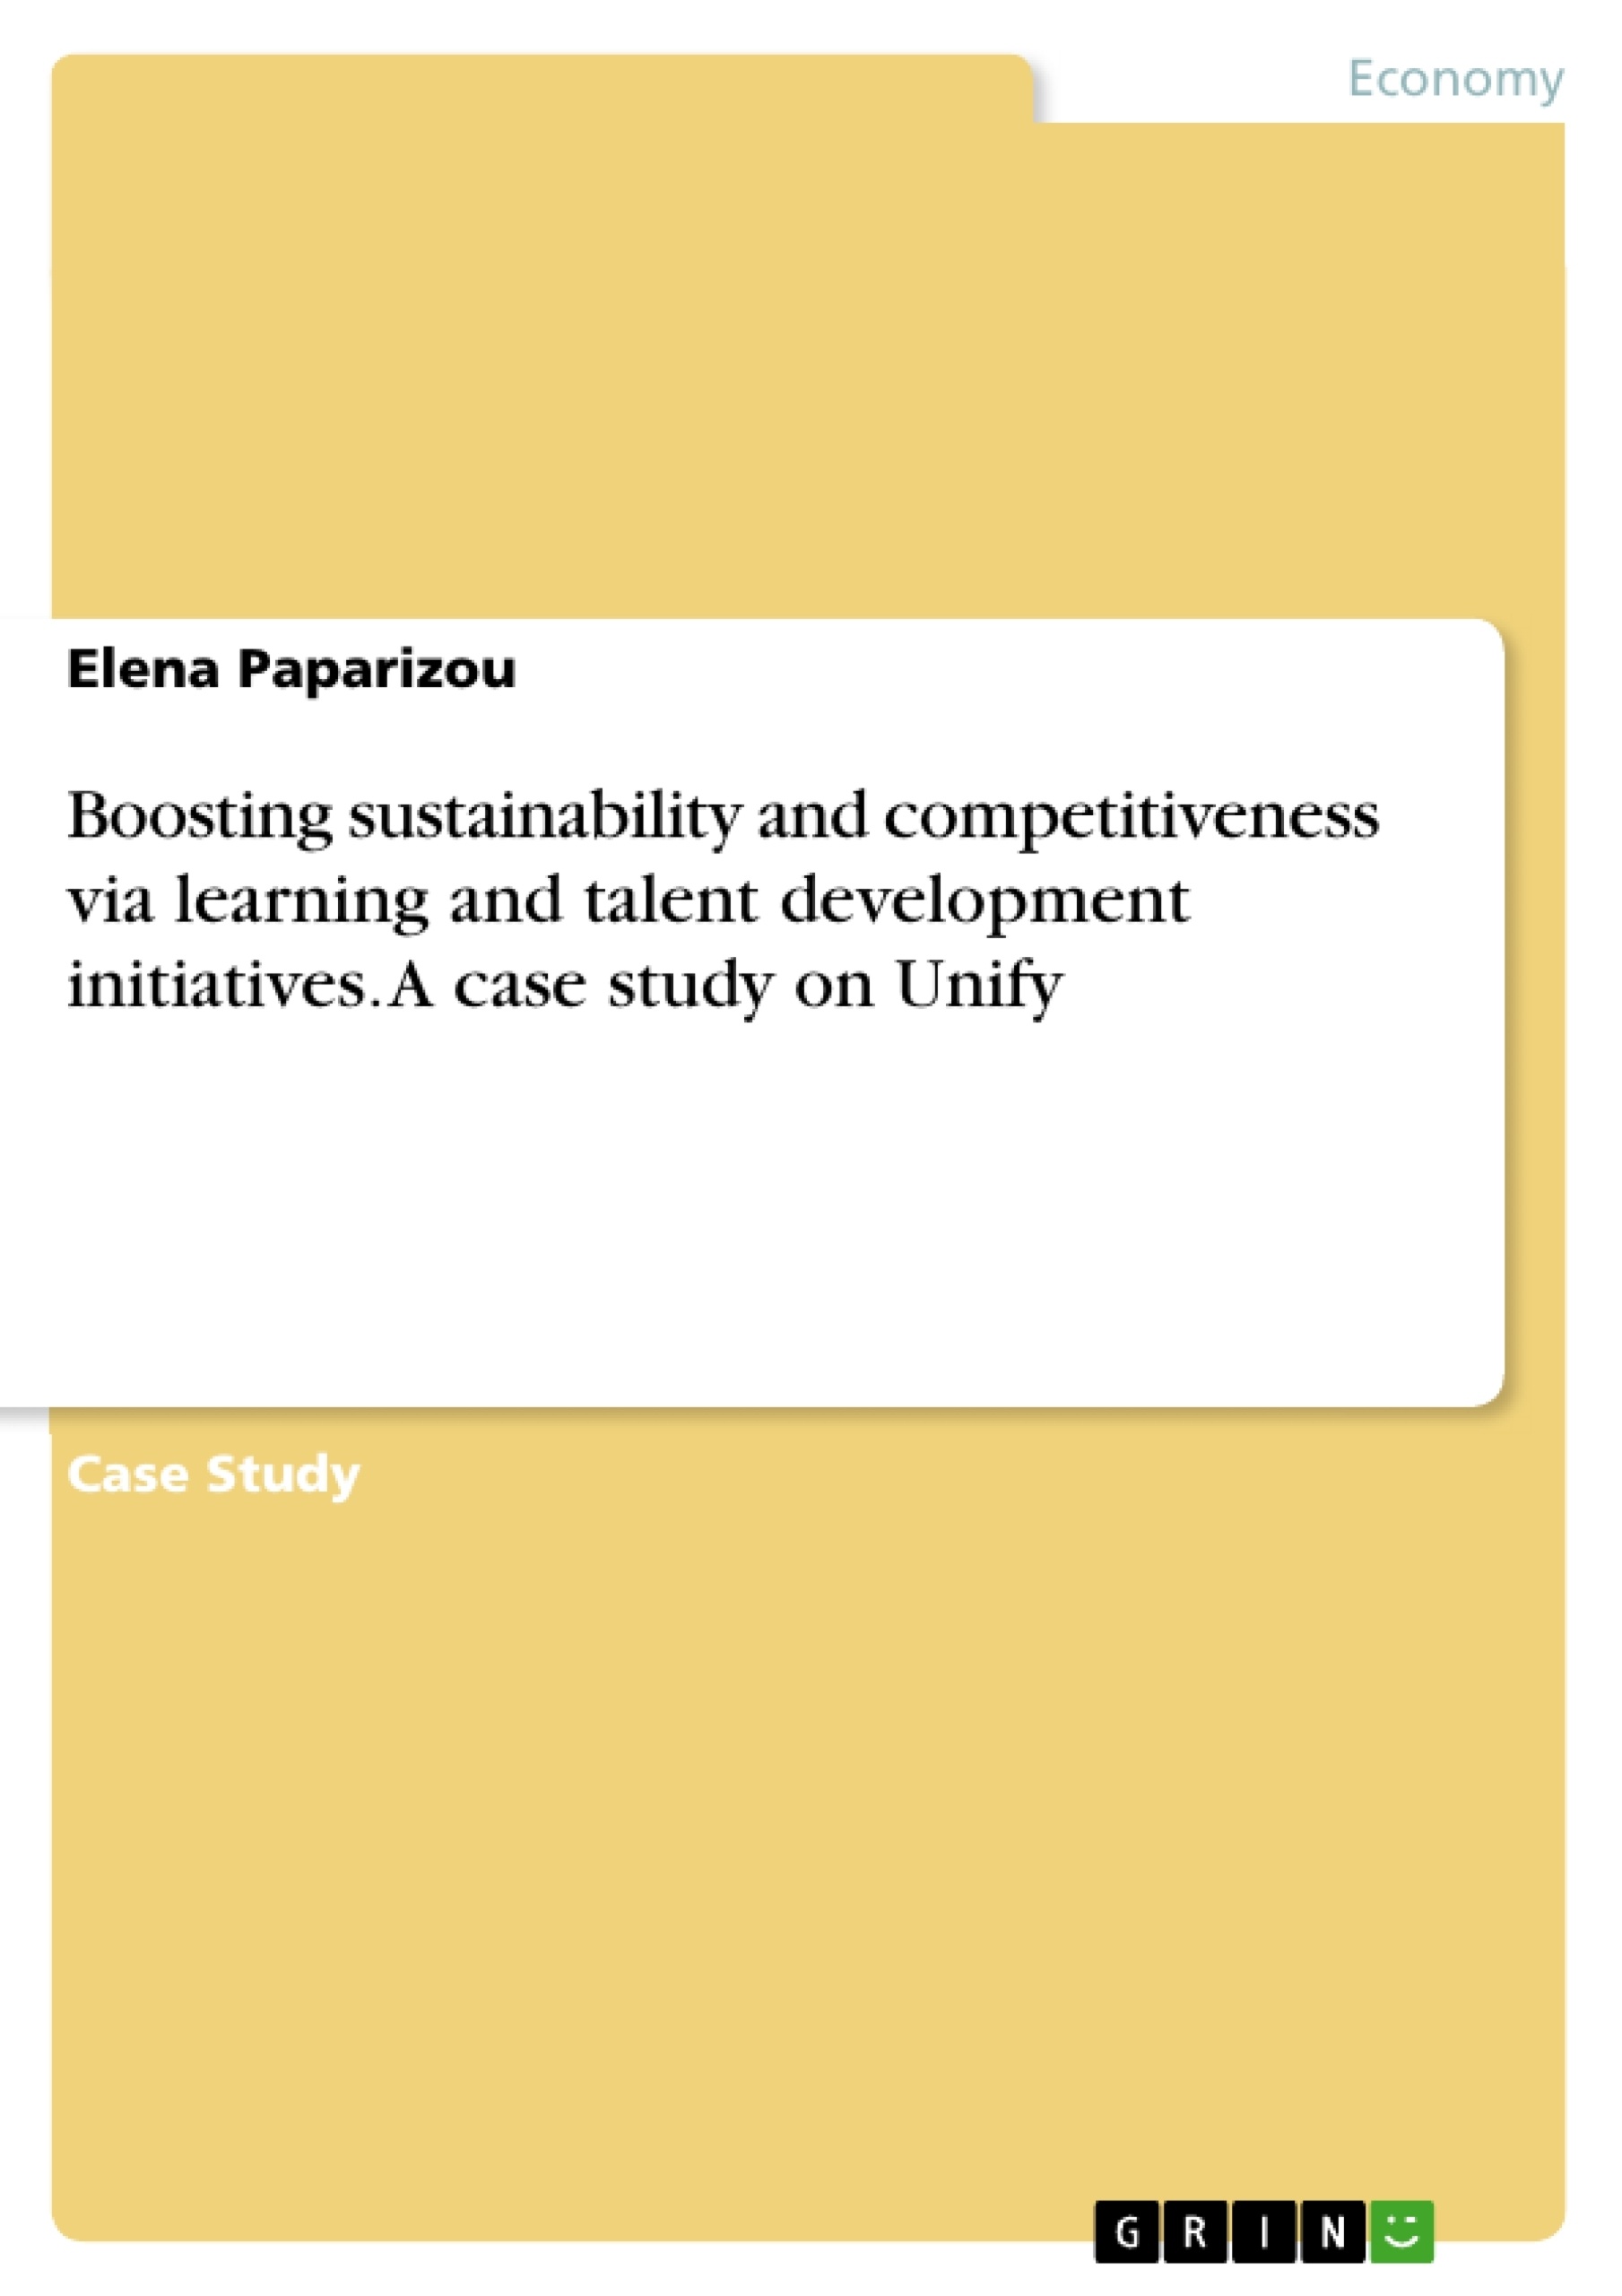 Título: Boosting sustainability and competitiveness via learning and talent development initiatives. A case study on Unify